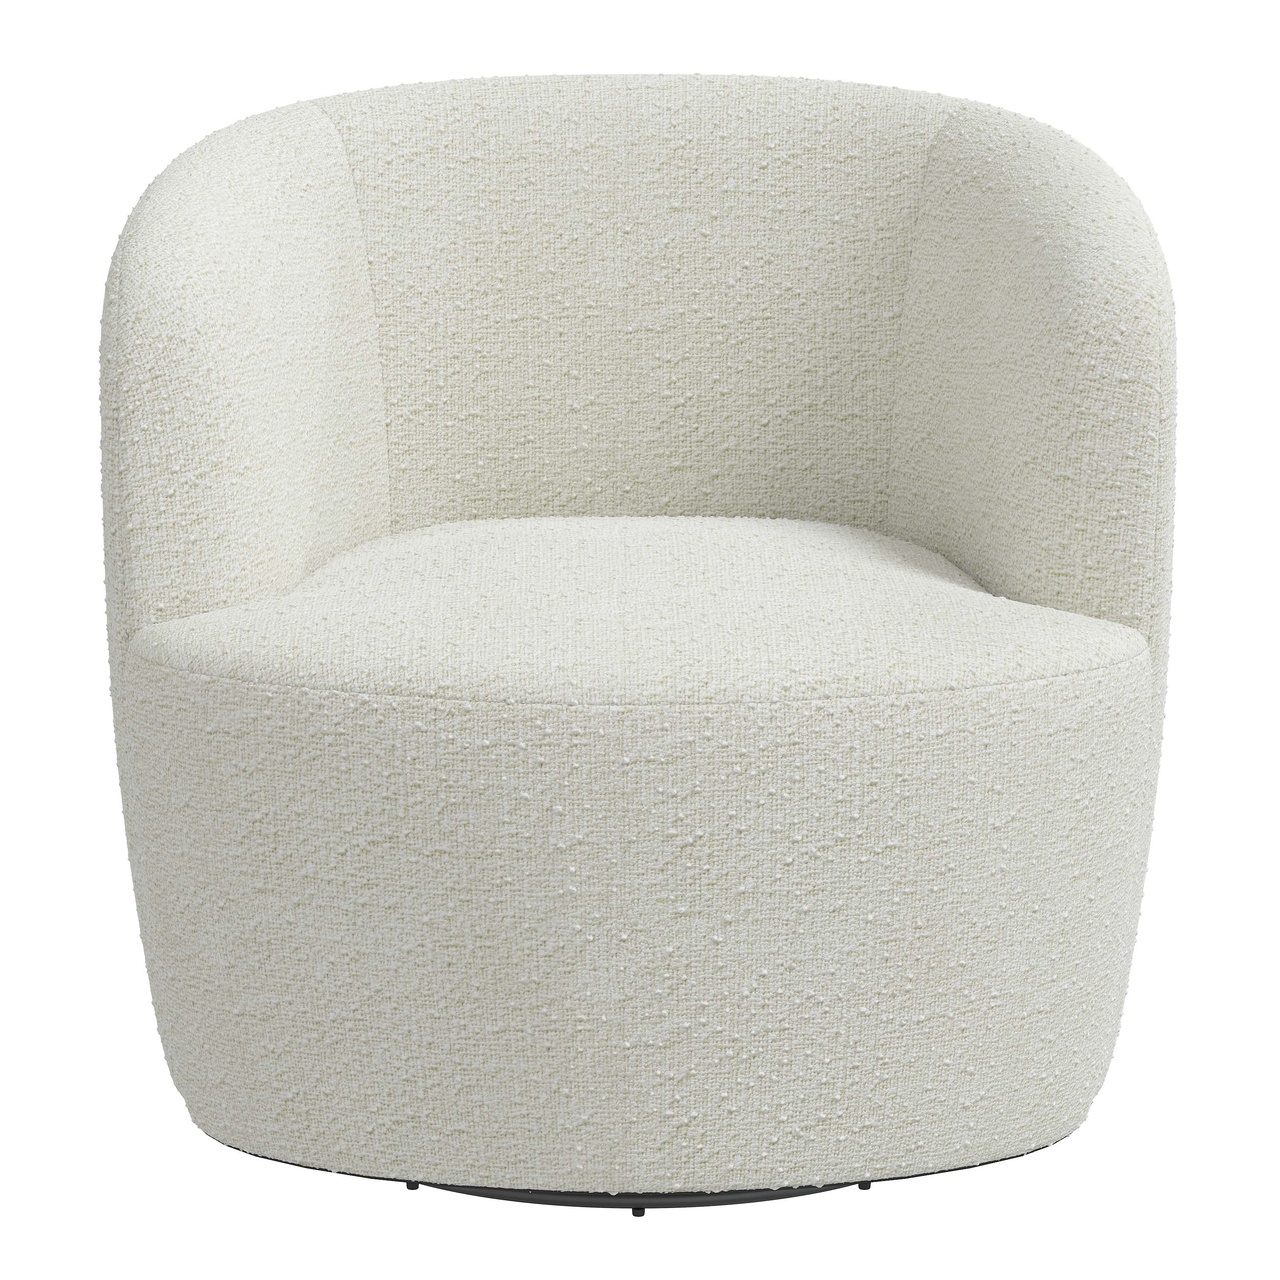 Collette Swivel Chair - Image 1